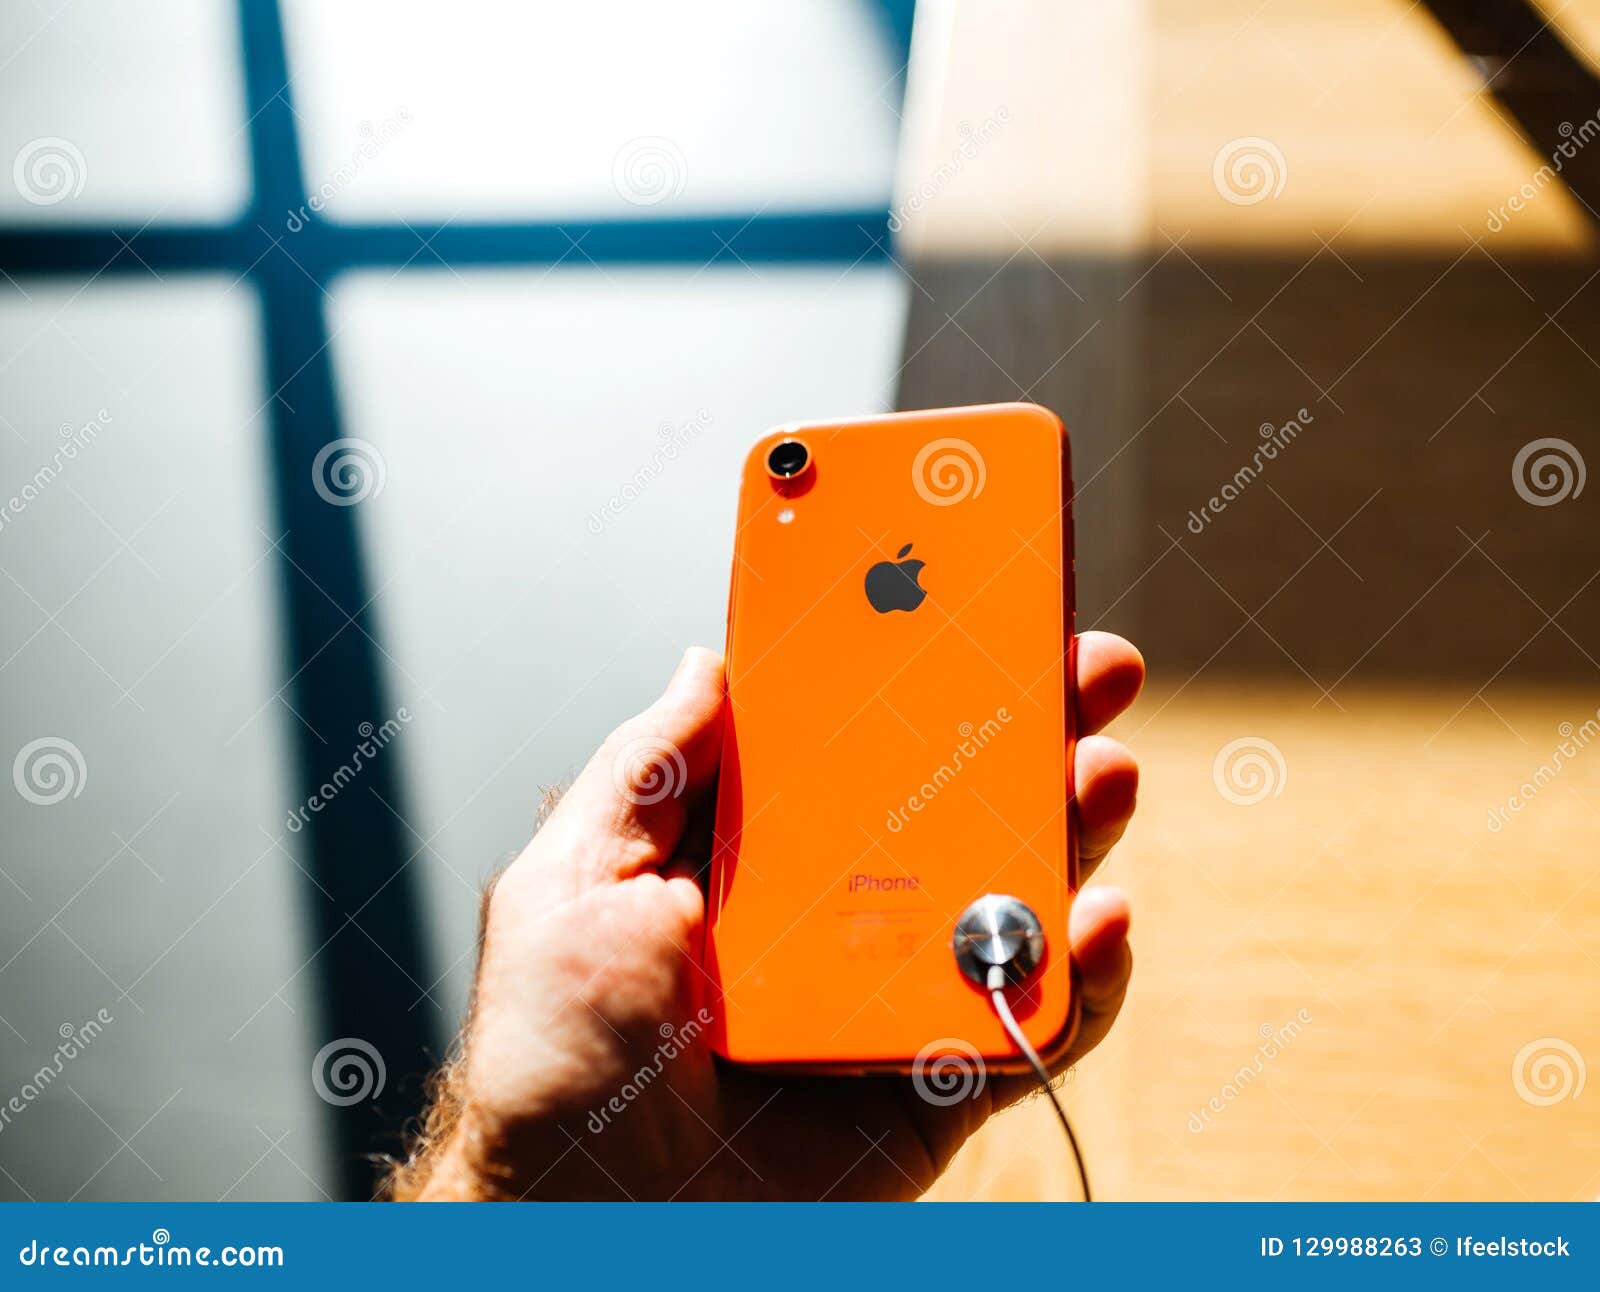 Man New Apple Iphone Xr Red Editorial Stock Photo - Image of holding